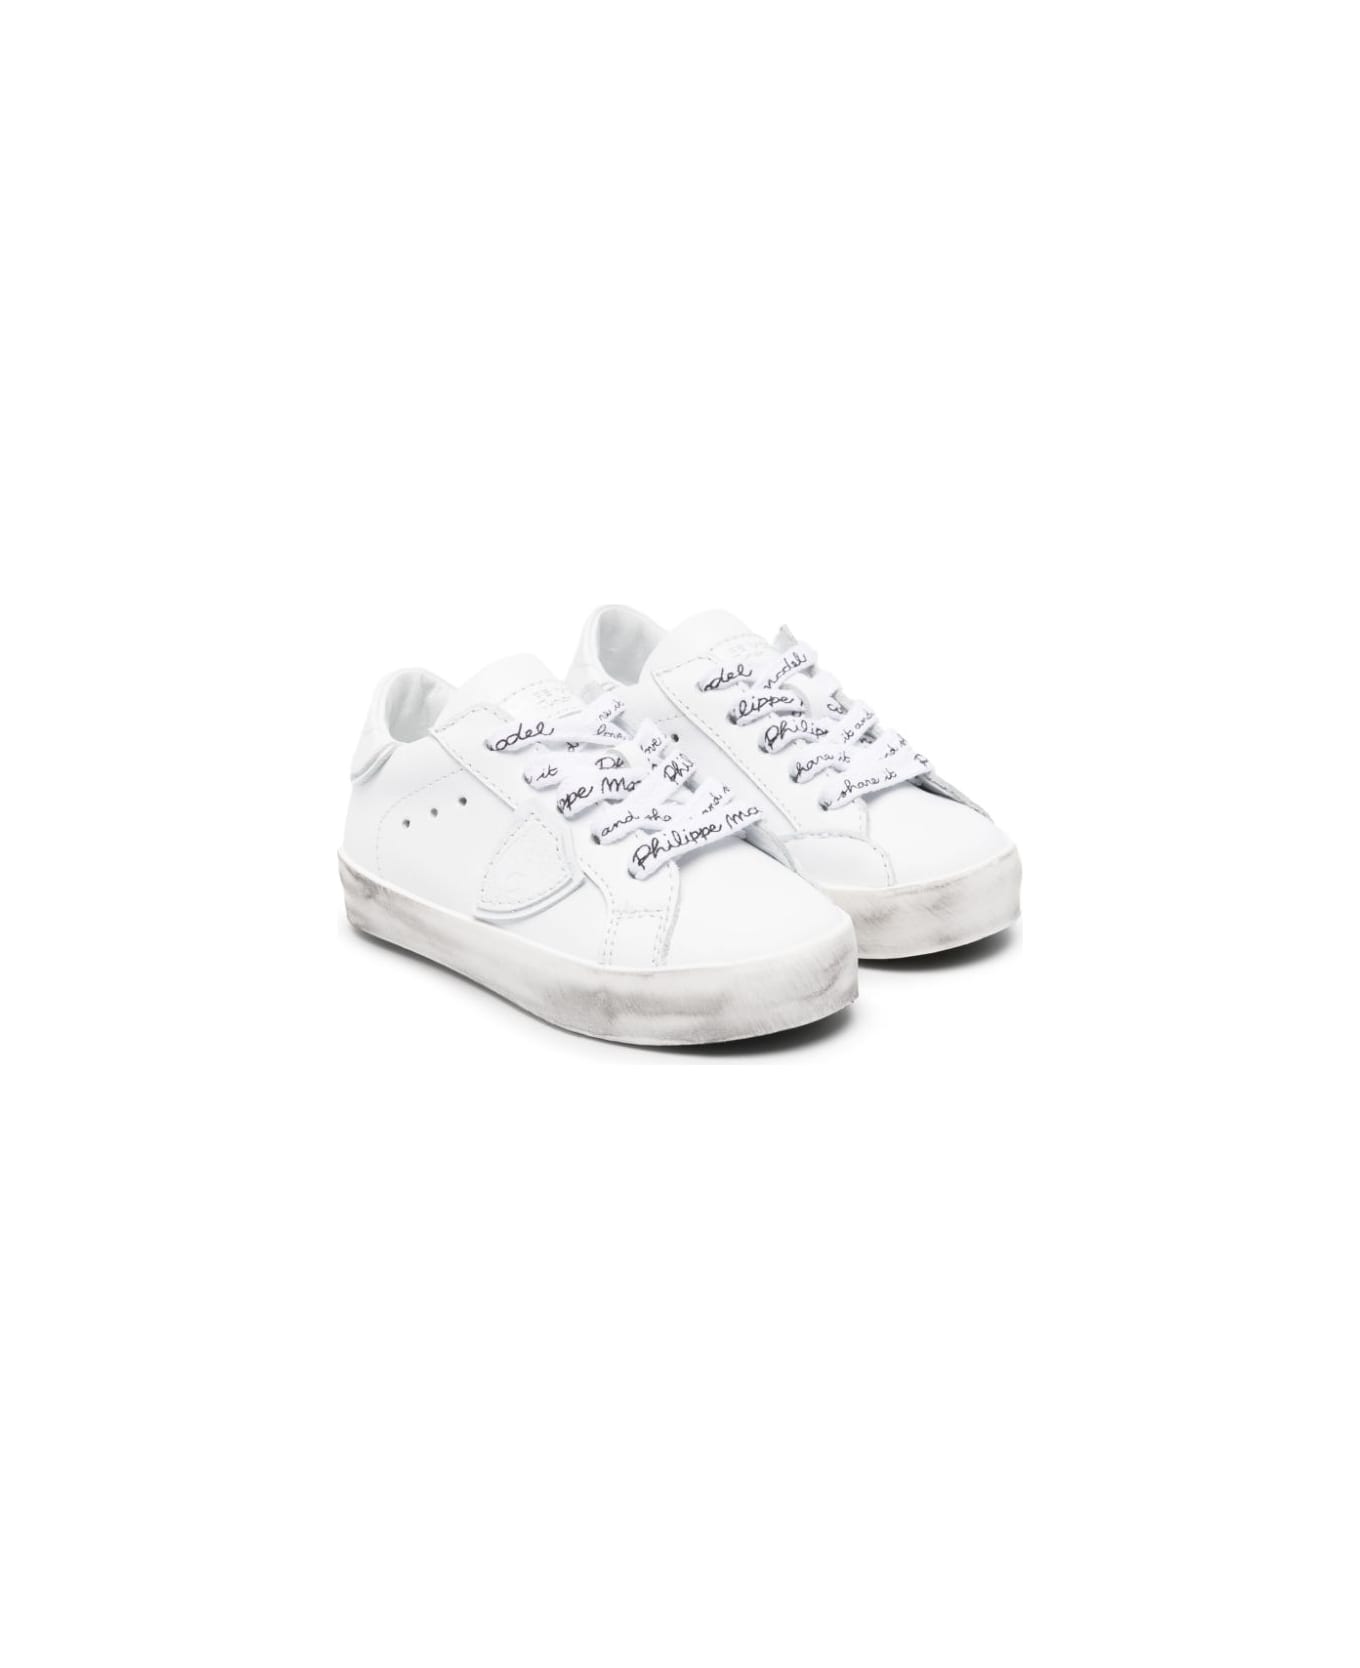 Philippe Model Sneakers With Application - White シューズ